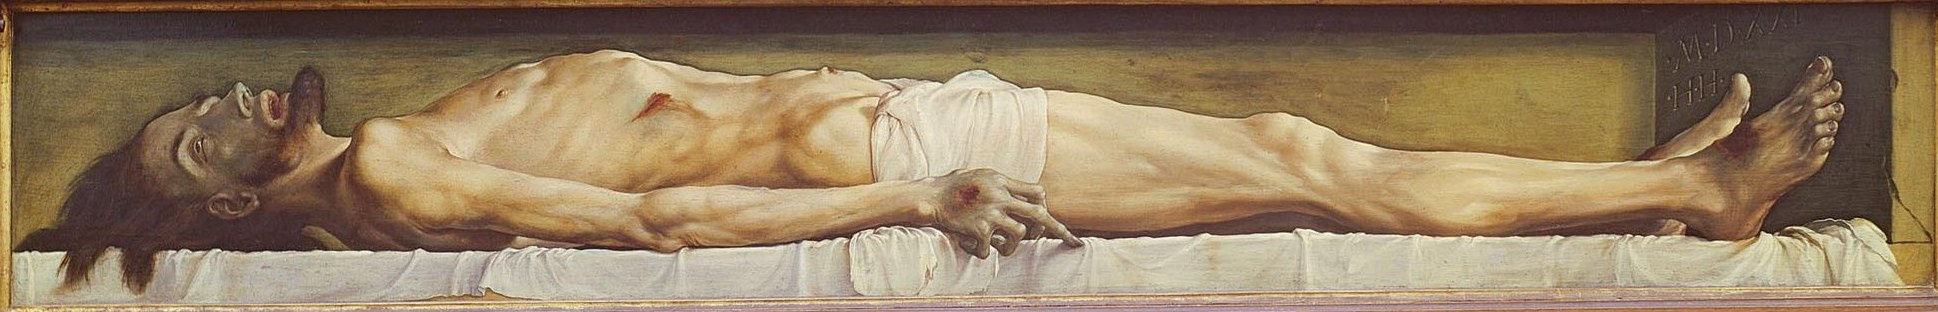 Hans Holbein the Younger. Dead Christ in the coffin